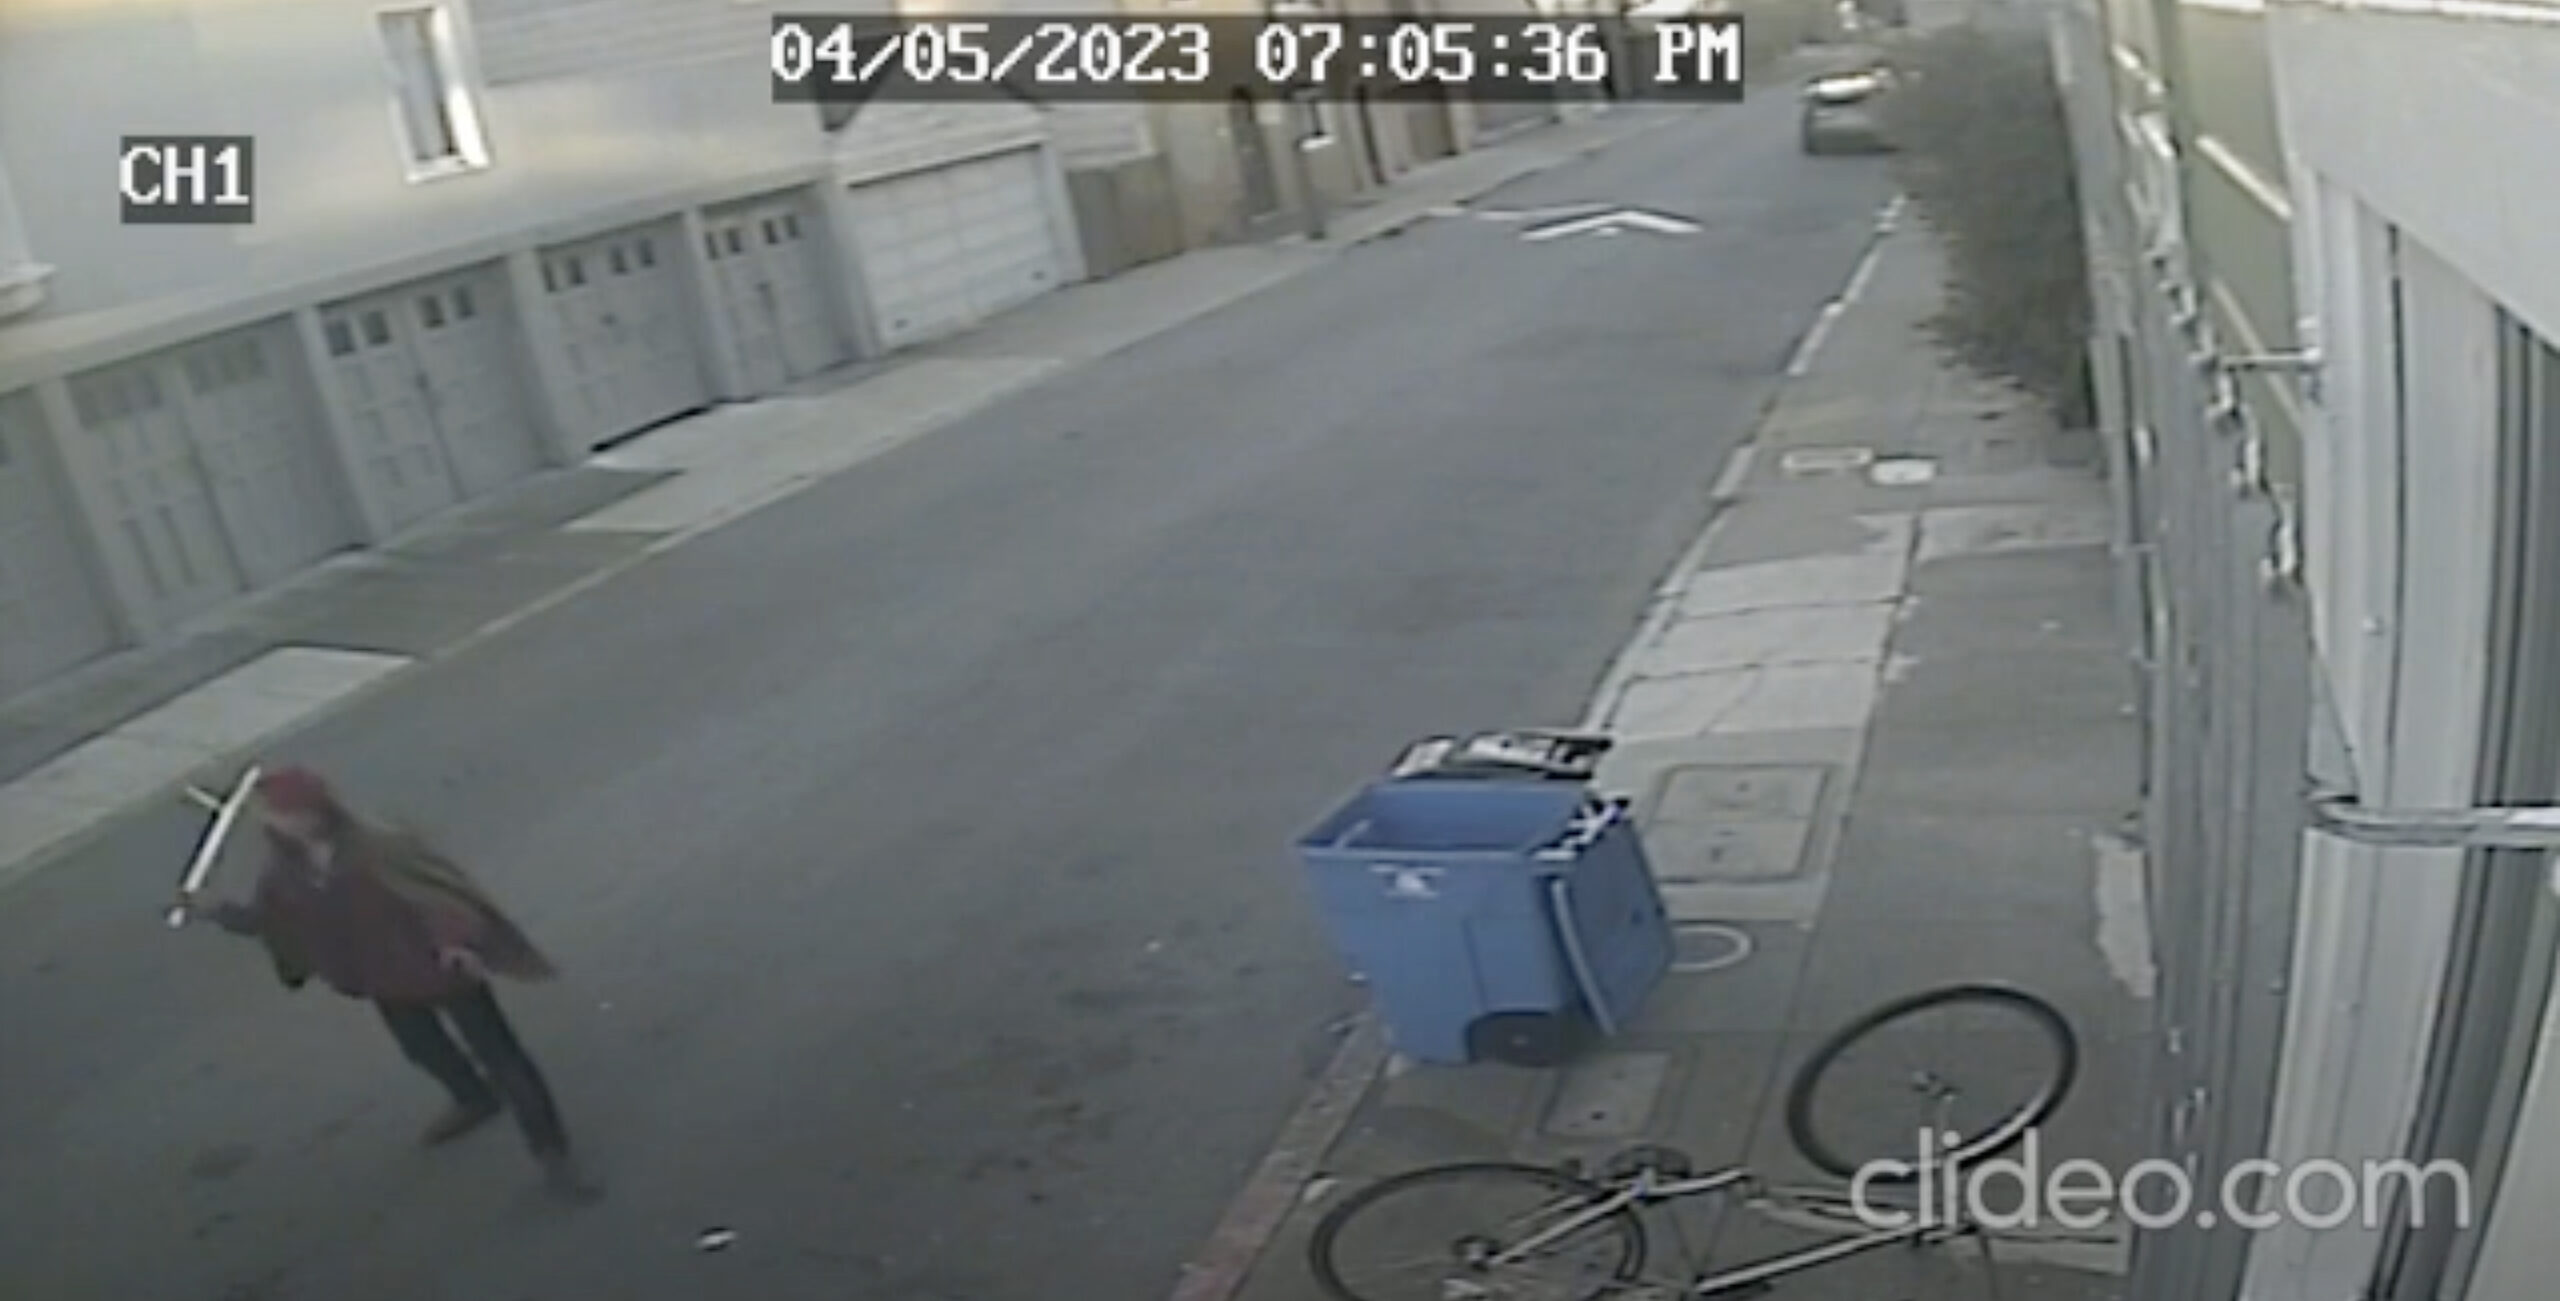 A security camera view showing a person walking past a fallen bicycle and a blue bin on a street.